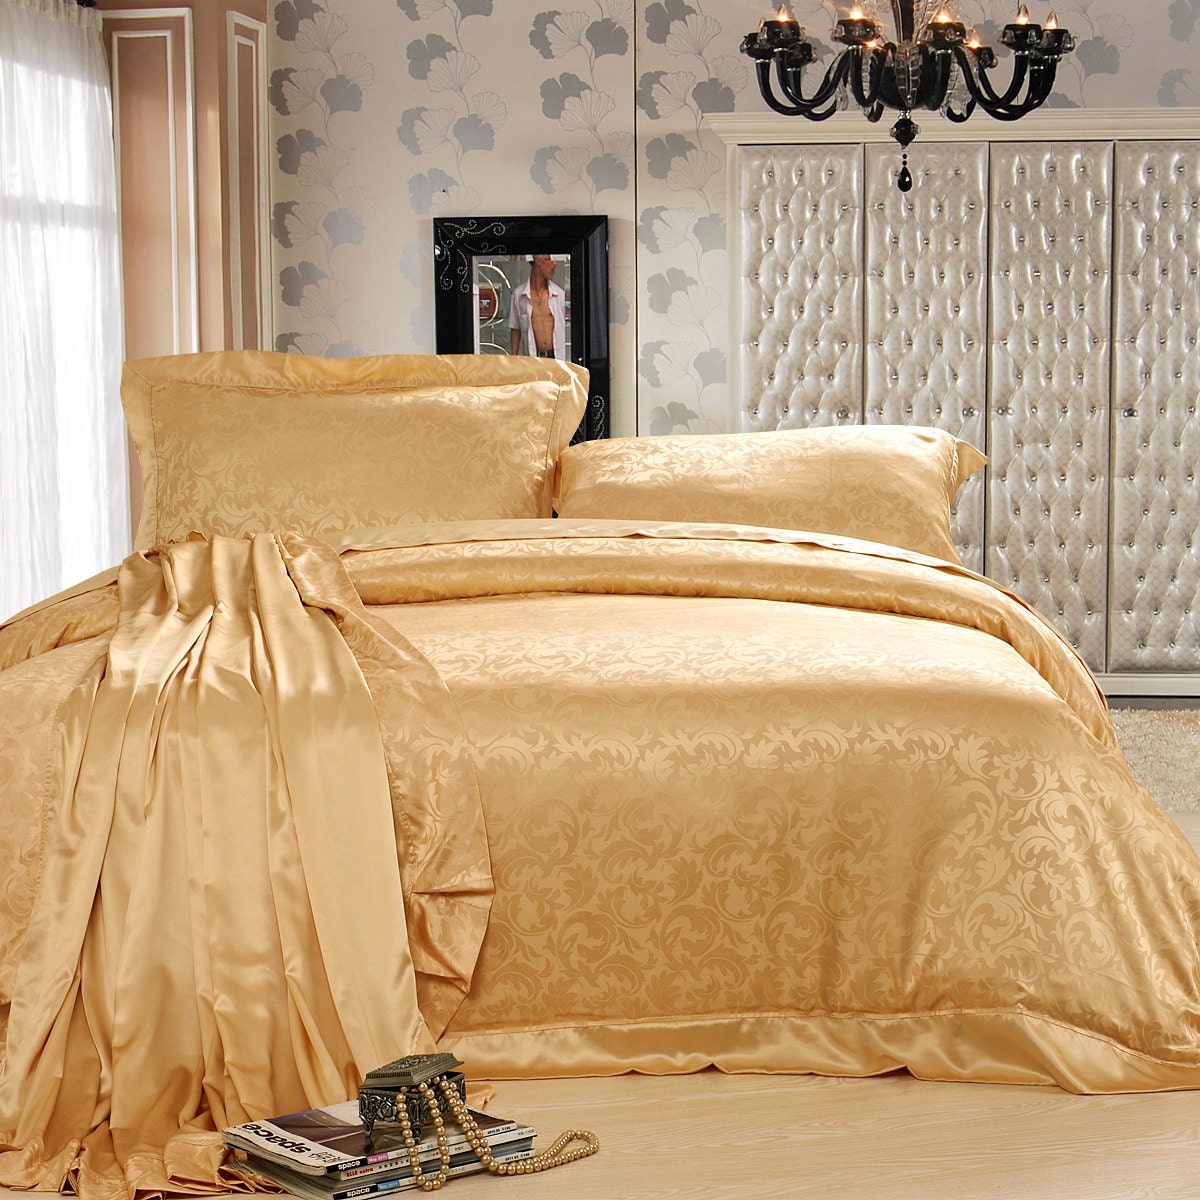 100% Silk Comforter Cover Gold Patterned Silk by SilkyAffection